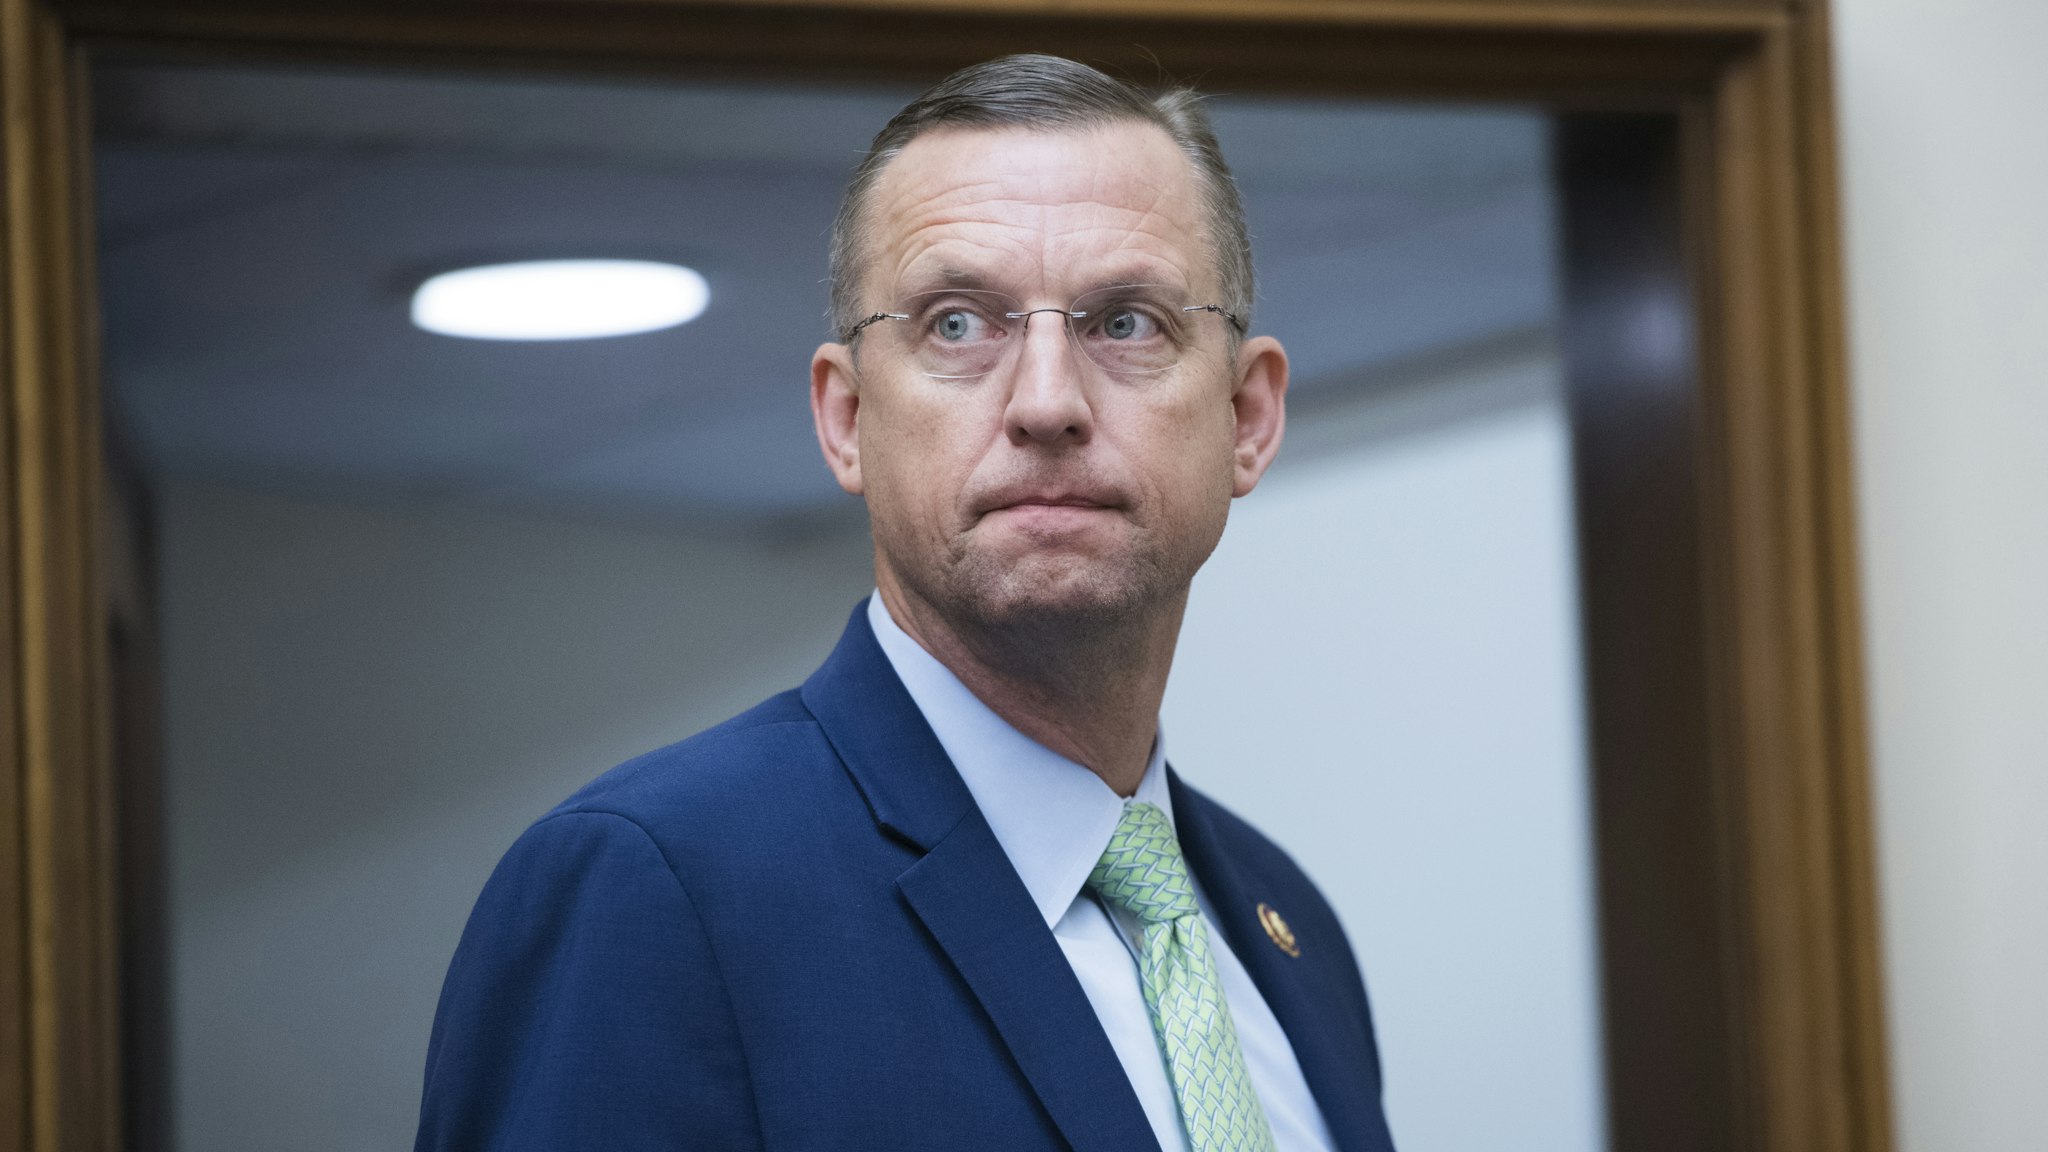 UNITED STATES - MAY 8: Ranking member Rep. Doug Collins, R-Ga., is seen during a House Judiciary Committee markup in Rayburn Building on Wednesday, May 8, 2019, to vote on whether to hold Attorney General William Barr in contempt of Congress for refusing to turn over the unredacted Mueller report to the committee.